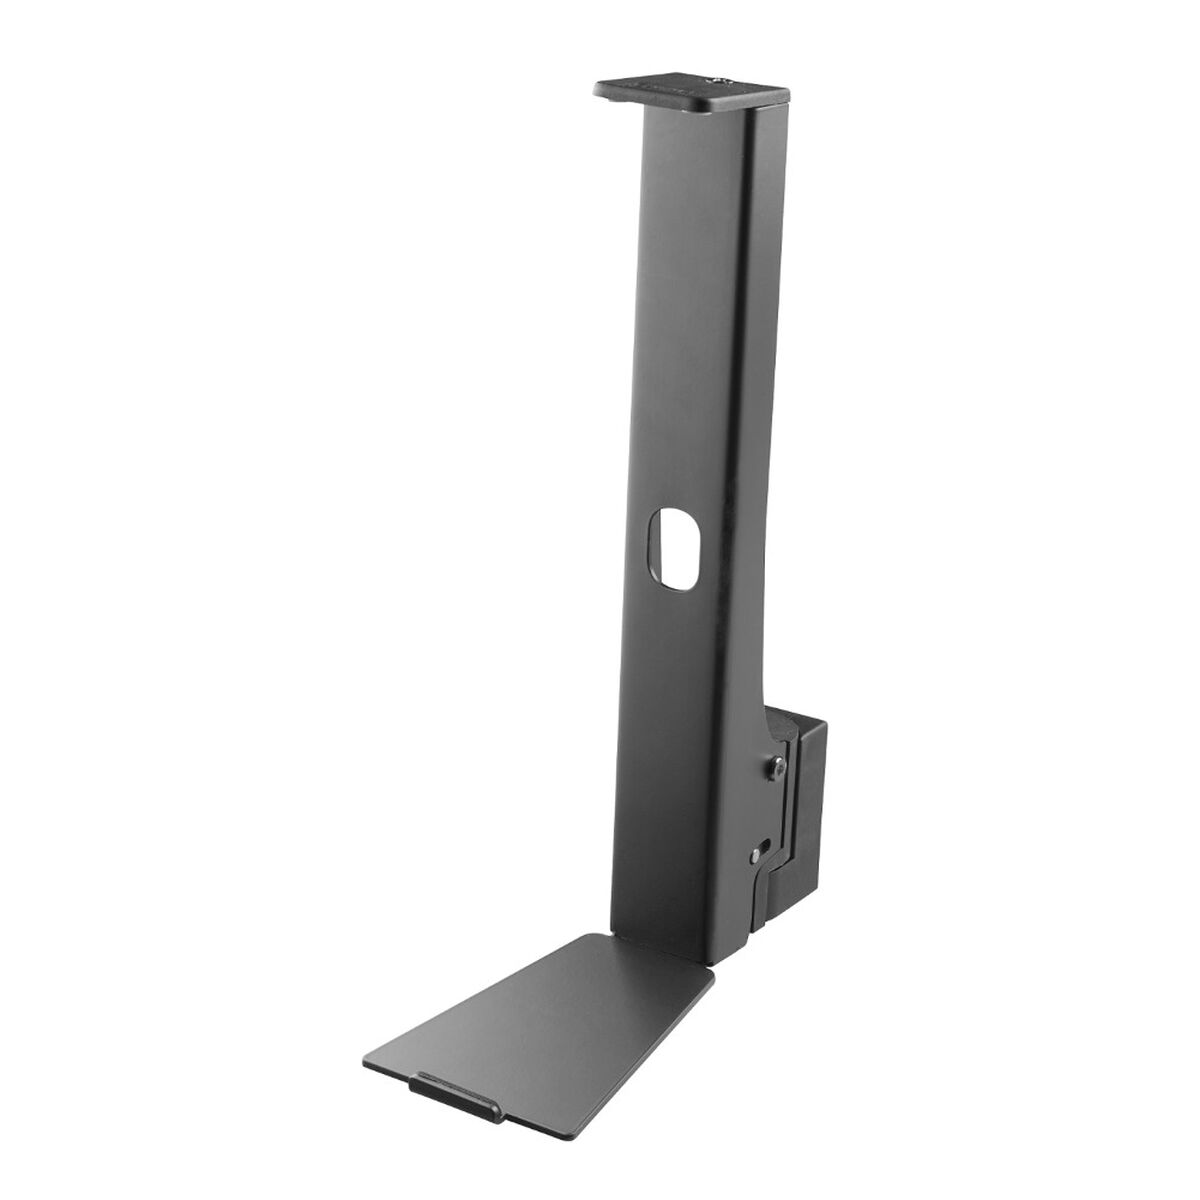 Speaker Stand Cavus Five/Play Black, Cavus, Electronics, Audio and Hi-Fi equipment, speaker-stand-cavus-five-play-black, Brand_Cavus, category-reference-2609, category-reference-2637, category-reference-2882, category-reference-t-19653, category-reference-t-19899, category-reference-t-21329, category-reference-t-25554, category-reference-t-7441, cinema and television, Condition_NEW, music, Price_50 - 100, RiotNook